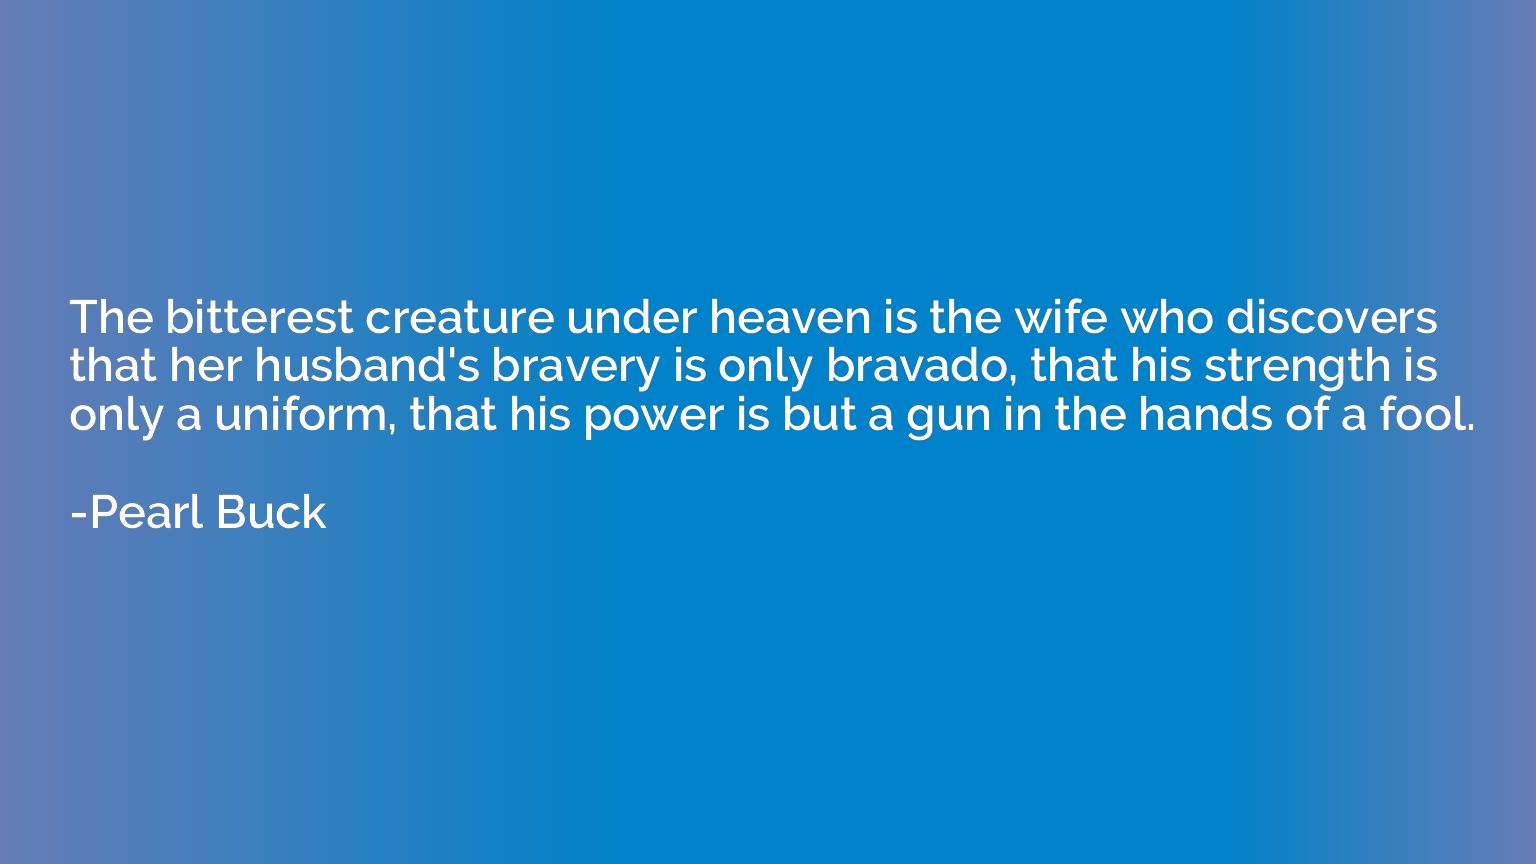 The bitterest creature under heaven is the wife who discover